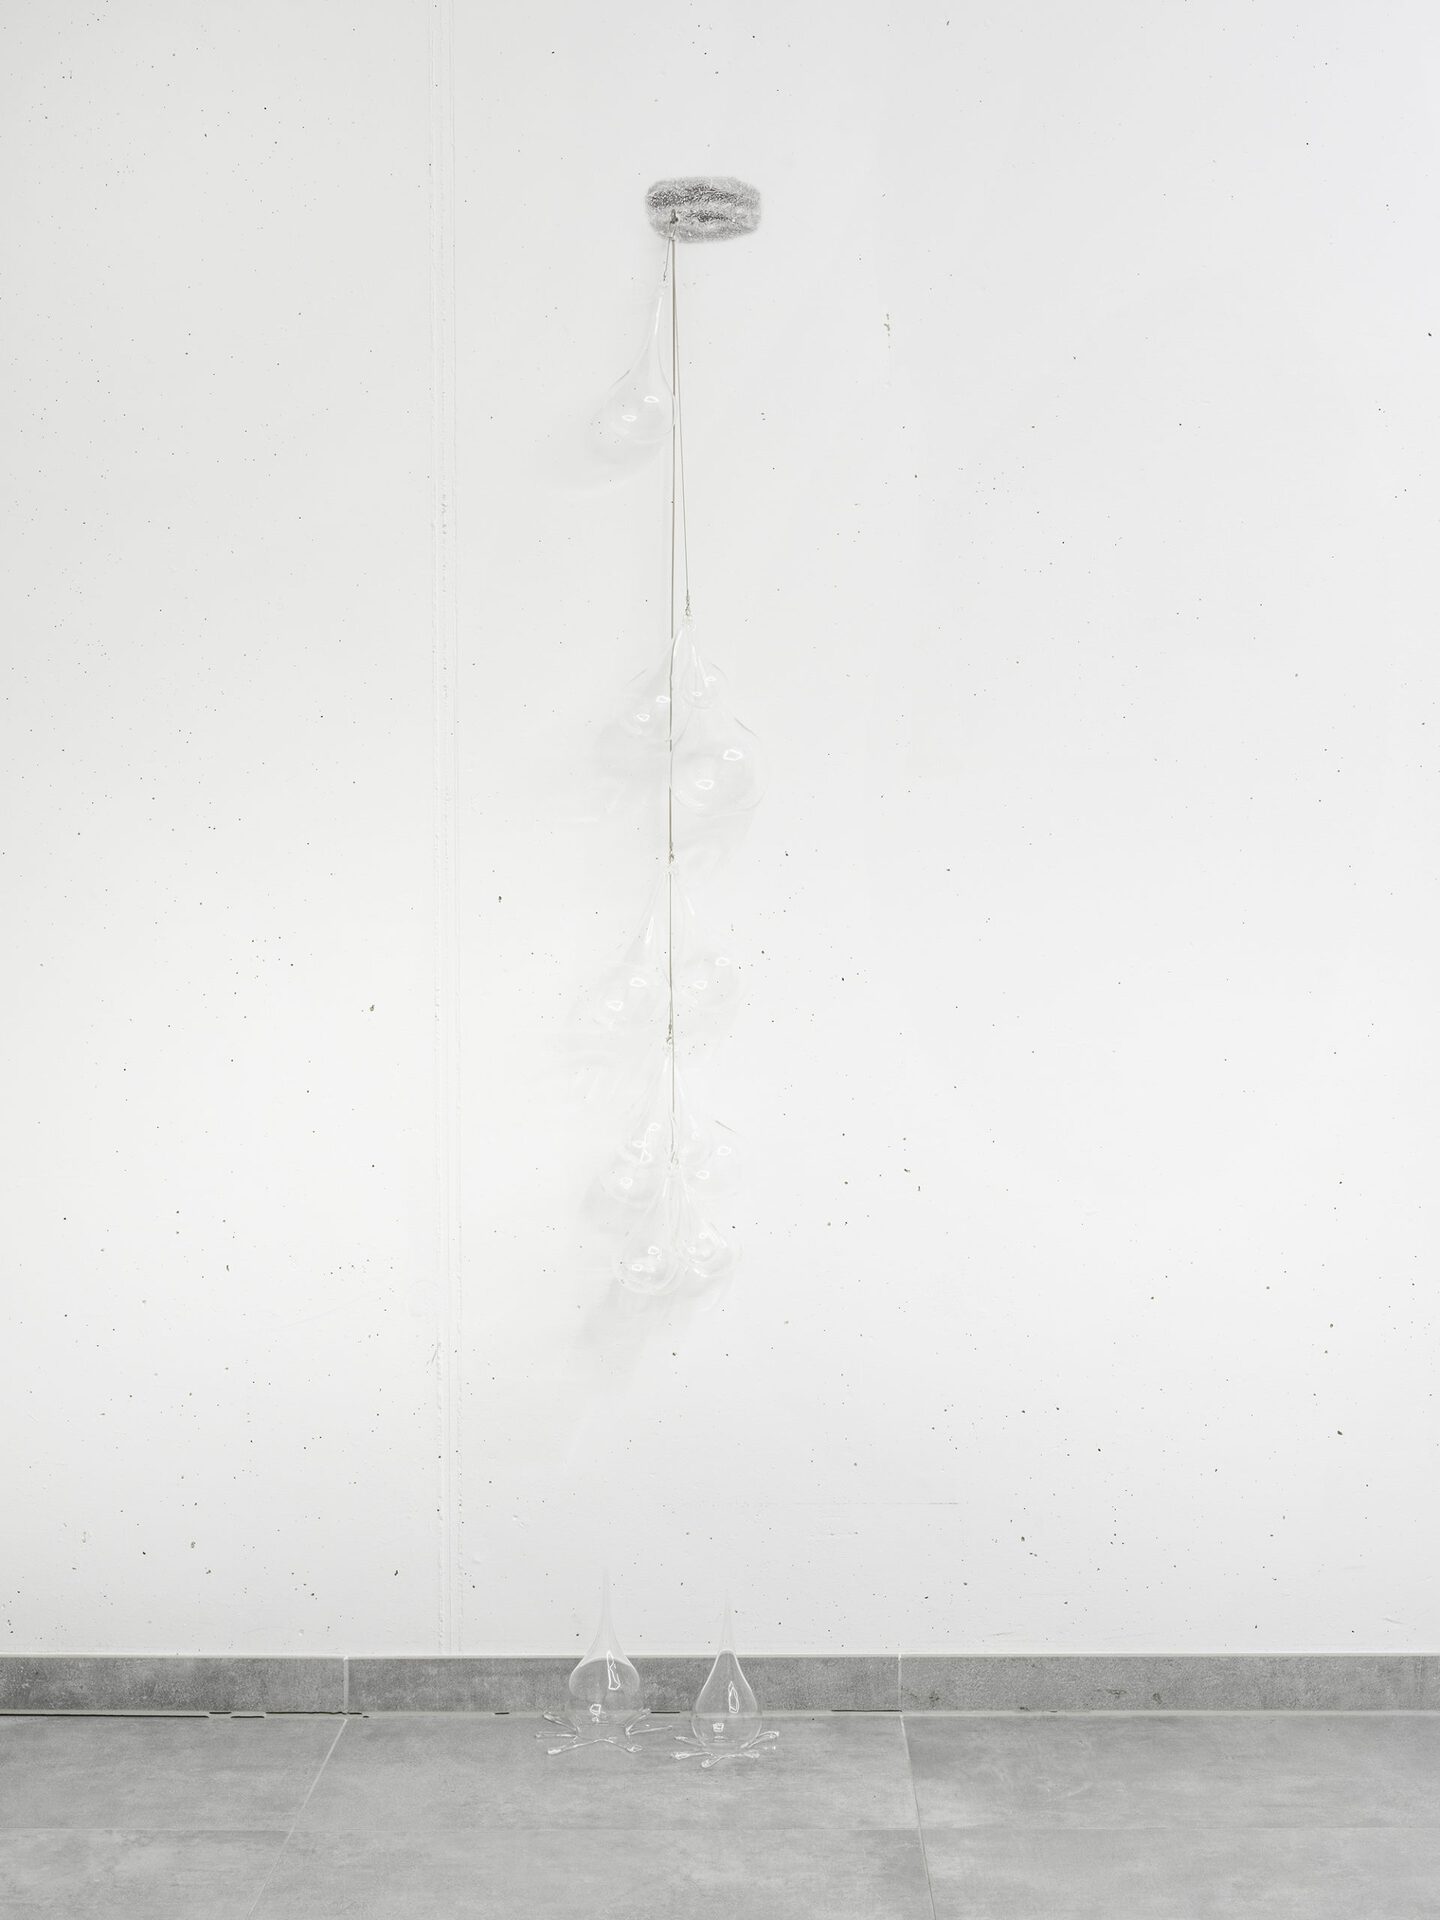 Giovanna Belossi, Good by to them, he had to go, 2022, transfer, wire, metal, glass